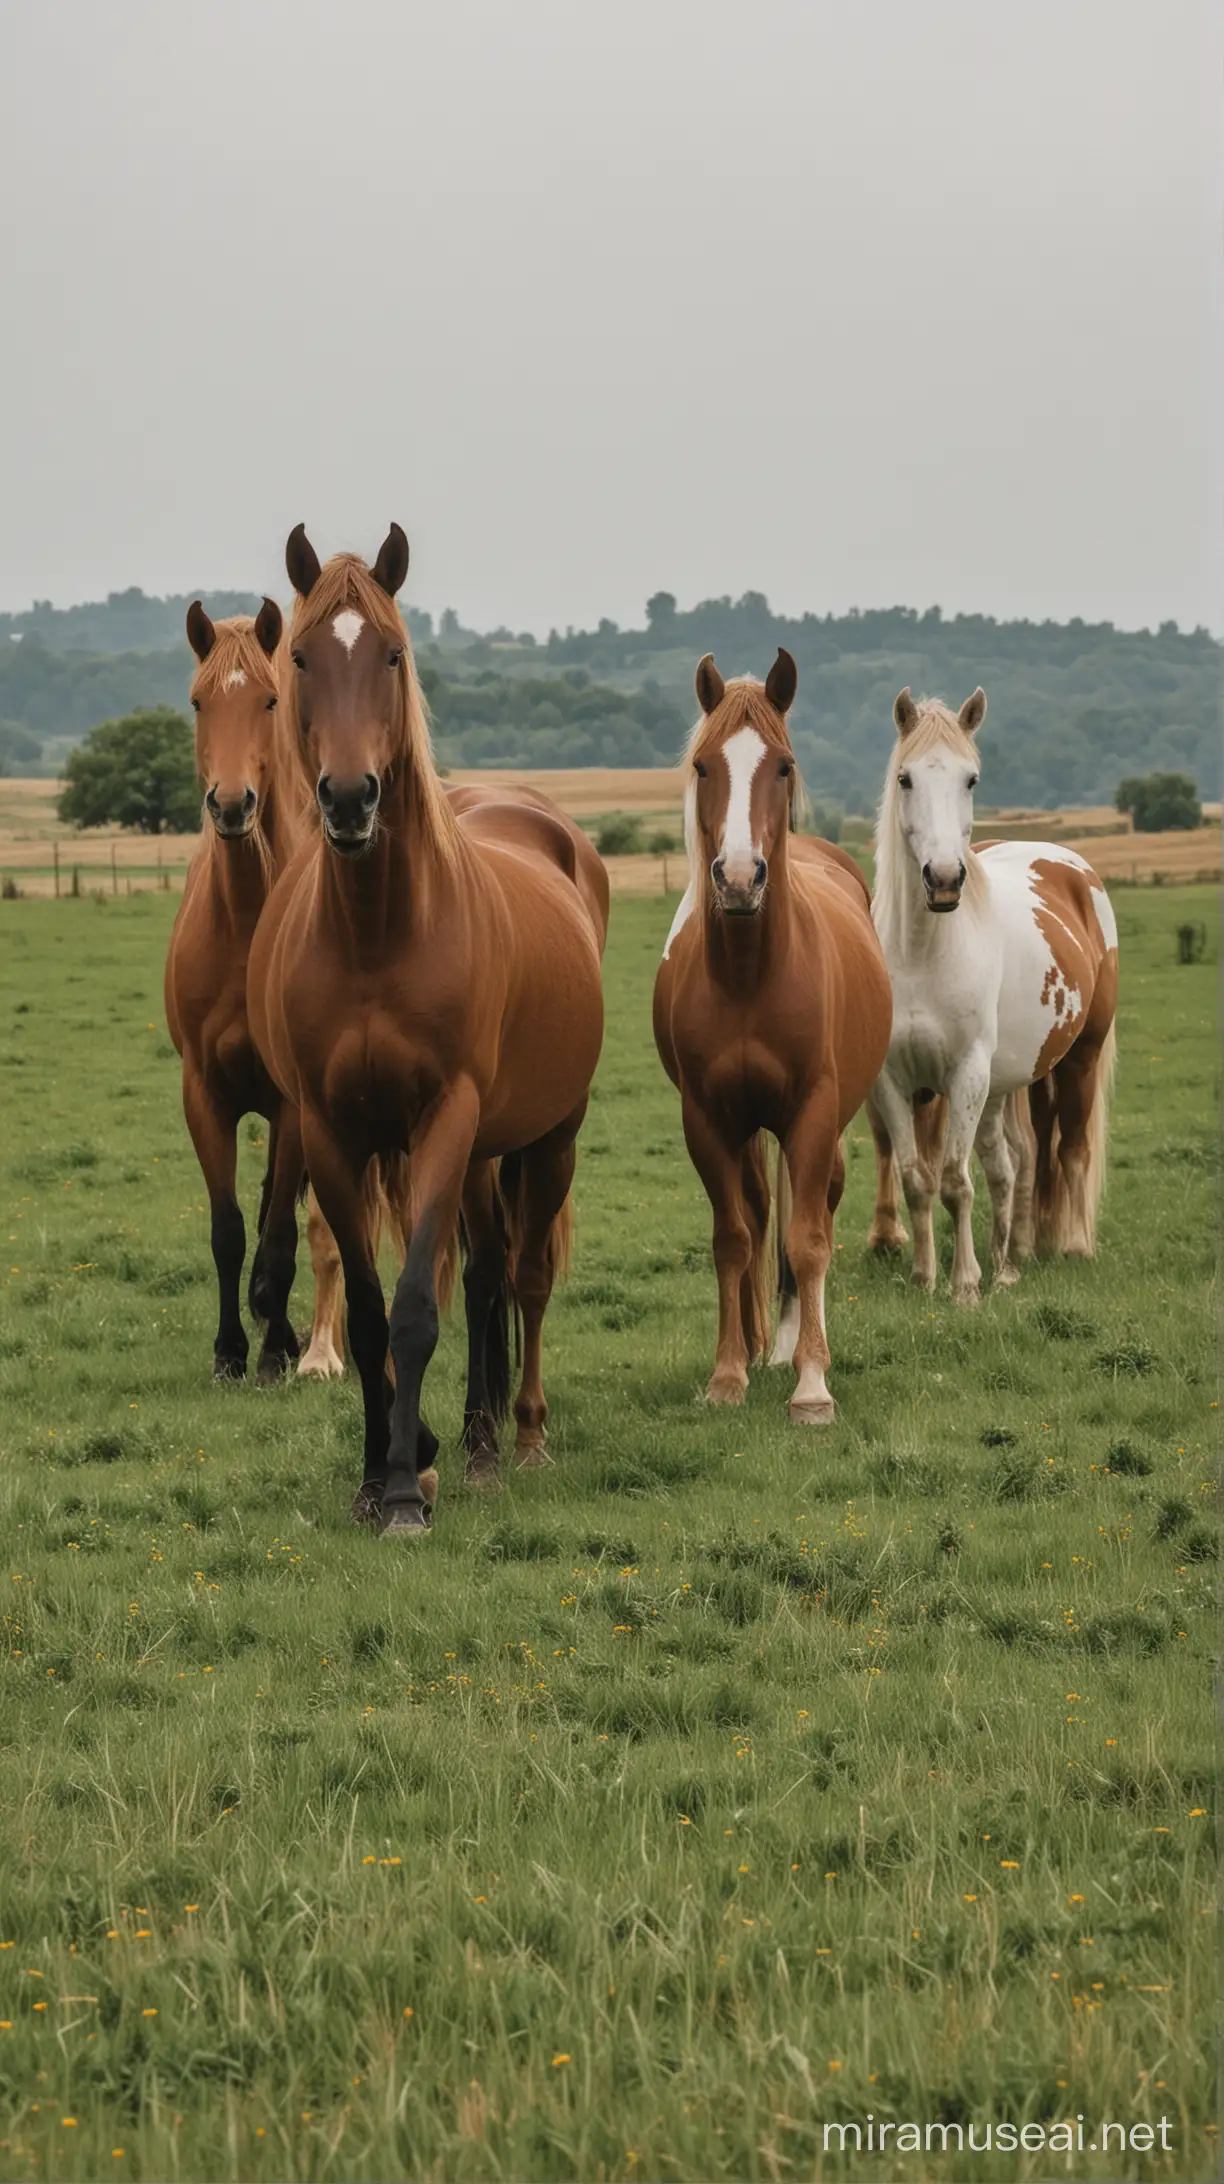 horses in the field are standing close in the frame